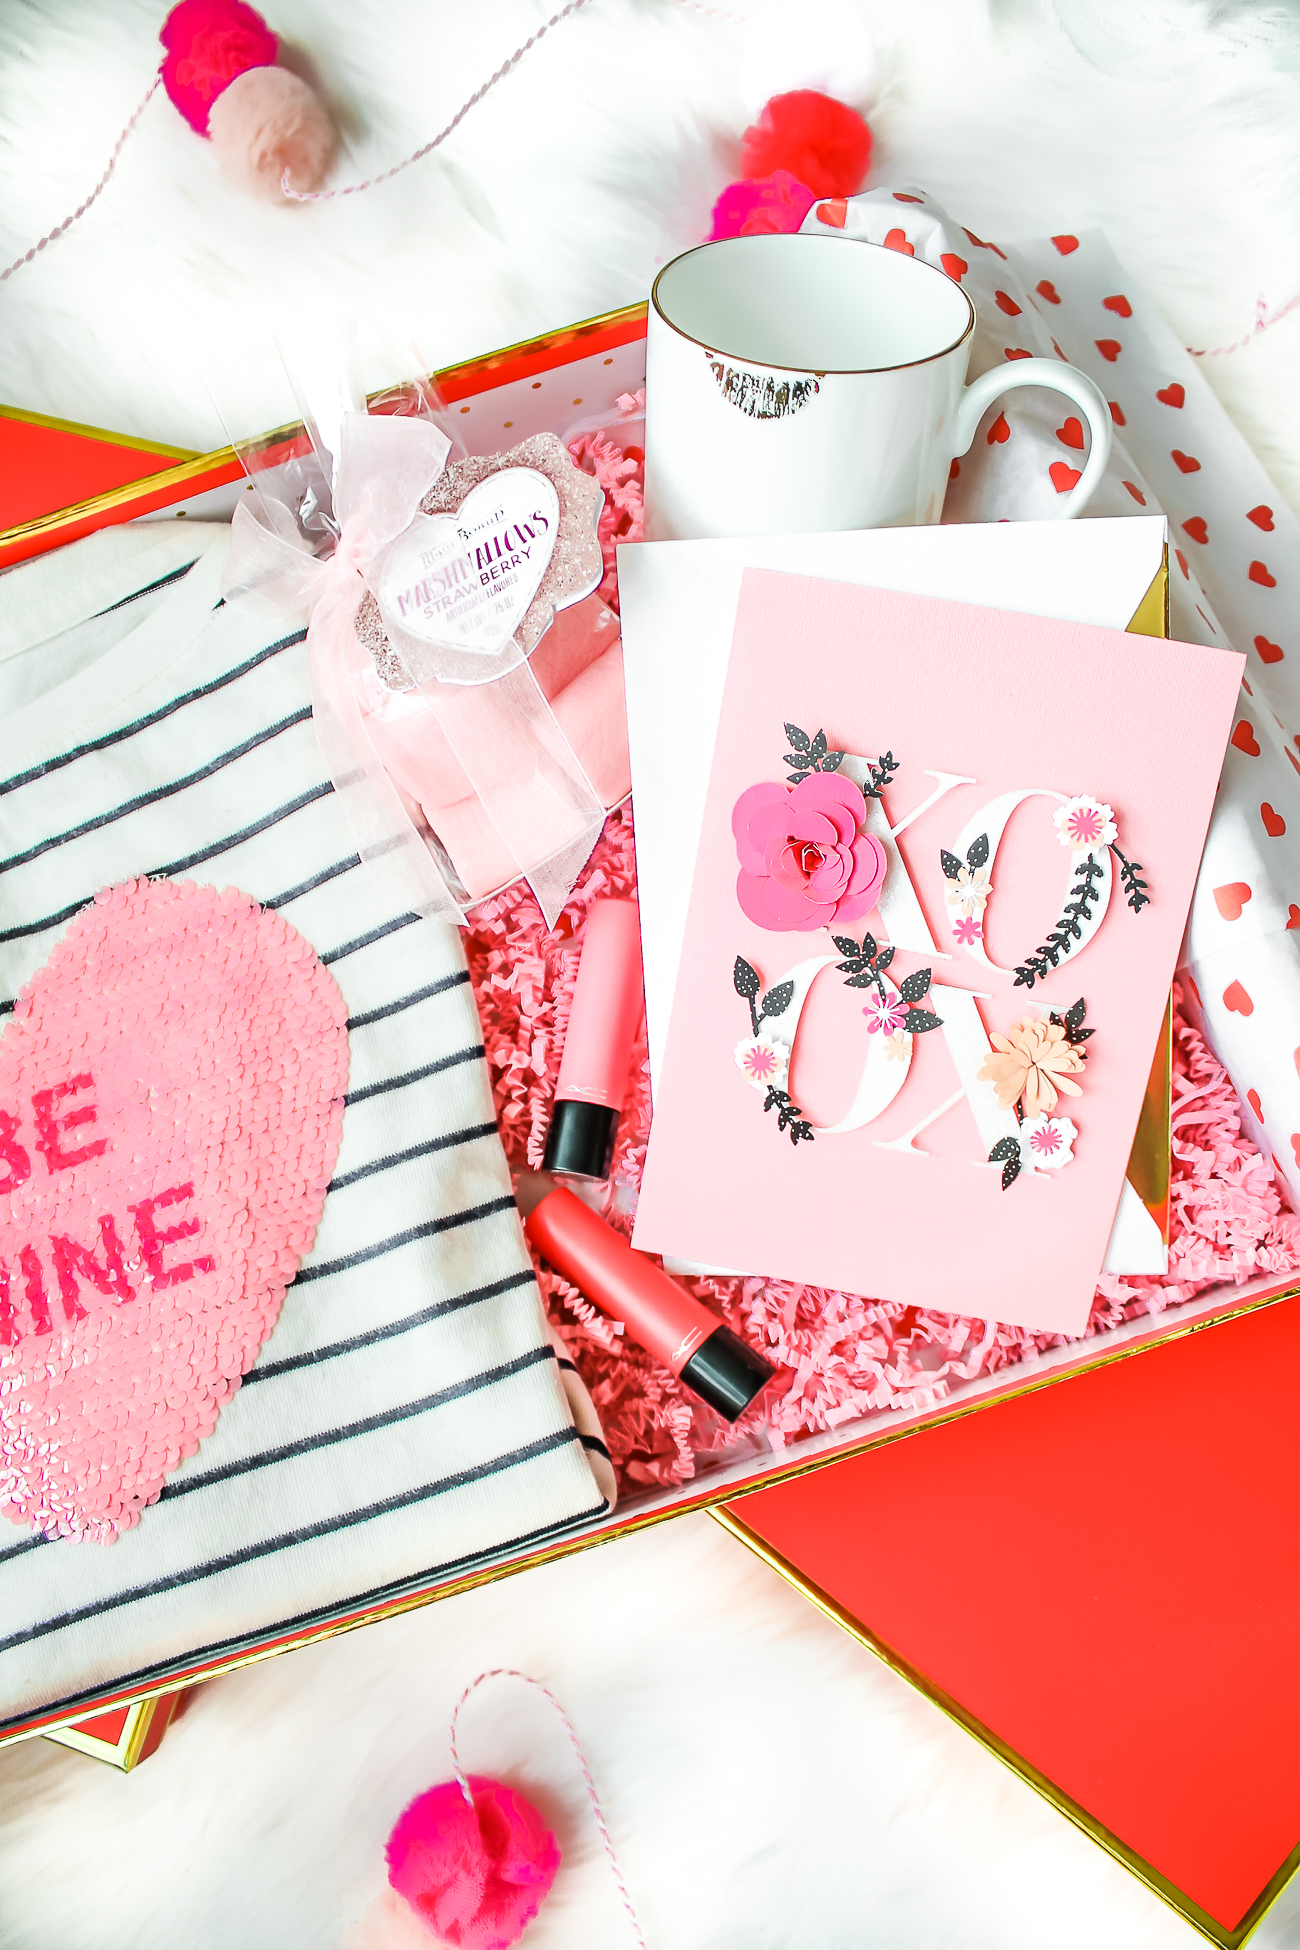 How to enjoy Valentine's Day as a single gal by fashion blogger Stephanie Ziajka from Diary of a Debutante, what to do on Valentine's Day when you are single, how to spend Valentine's Day alone